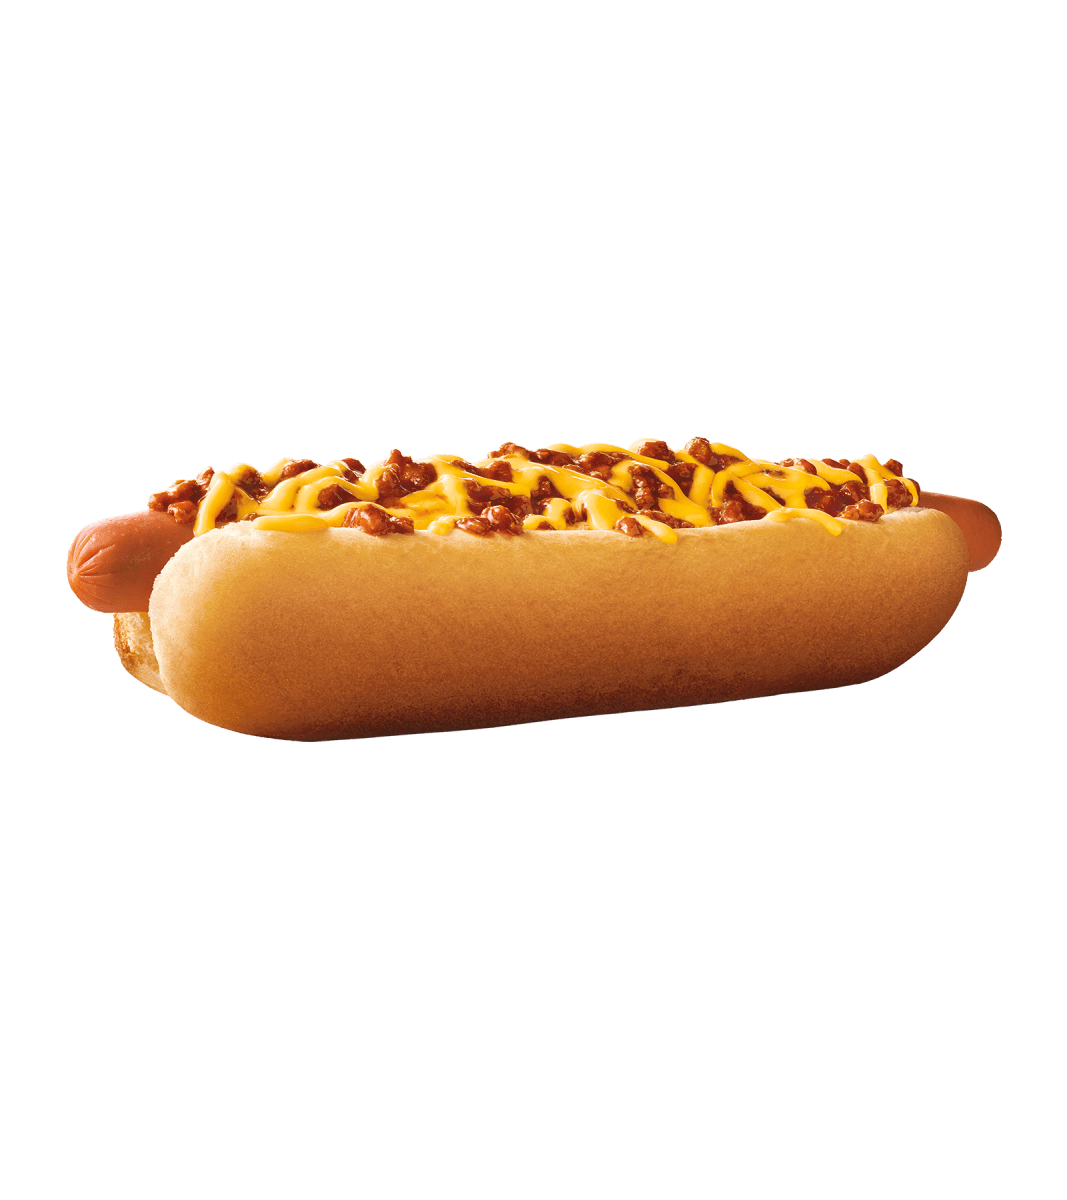 Footlong Quarter Pound Coney - Order Ahead Online, Hot Dogs